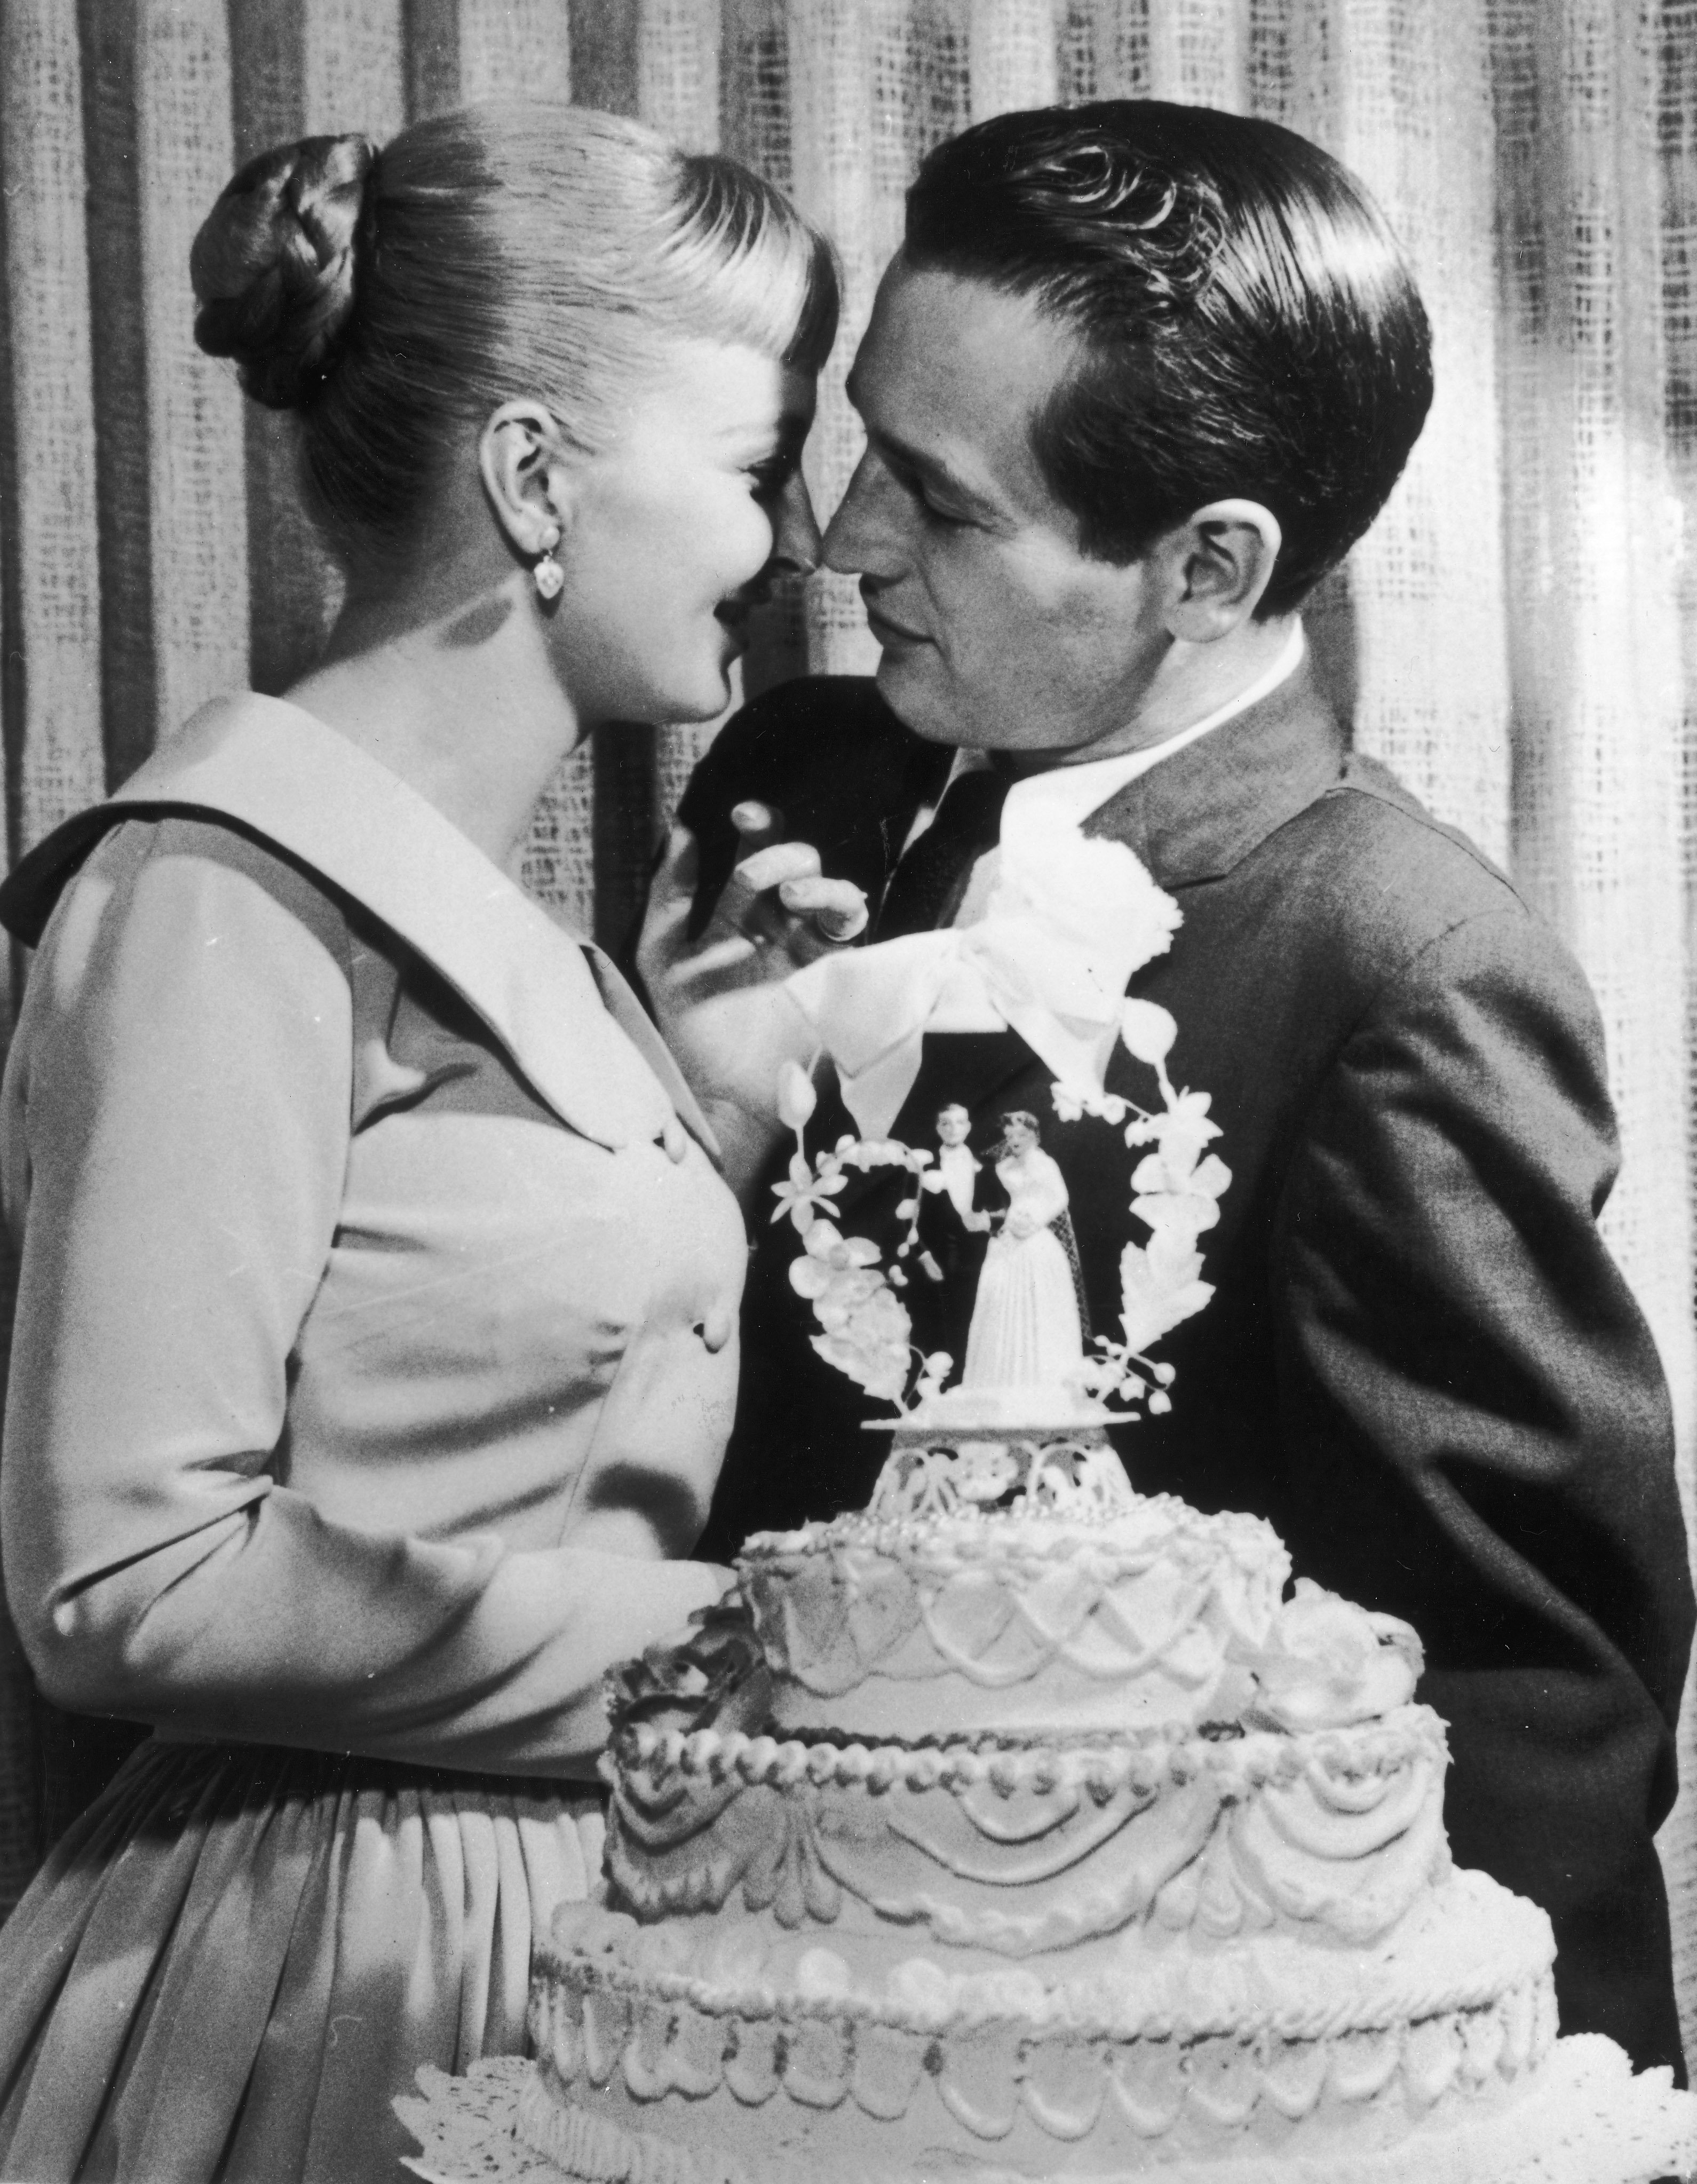 Paul Newman and Joanne Woodward kiss behind a cake during their wedding reception on January 29, 1958 at the El Rancho hotel-casino, Las Vegas, Nevada. | Photo: Getty Images